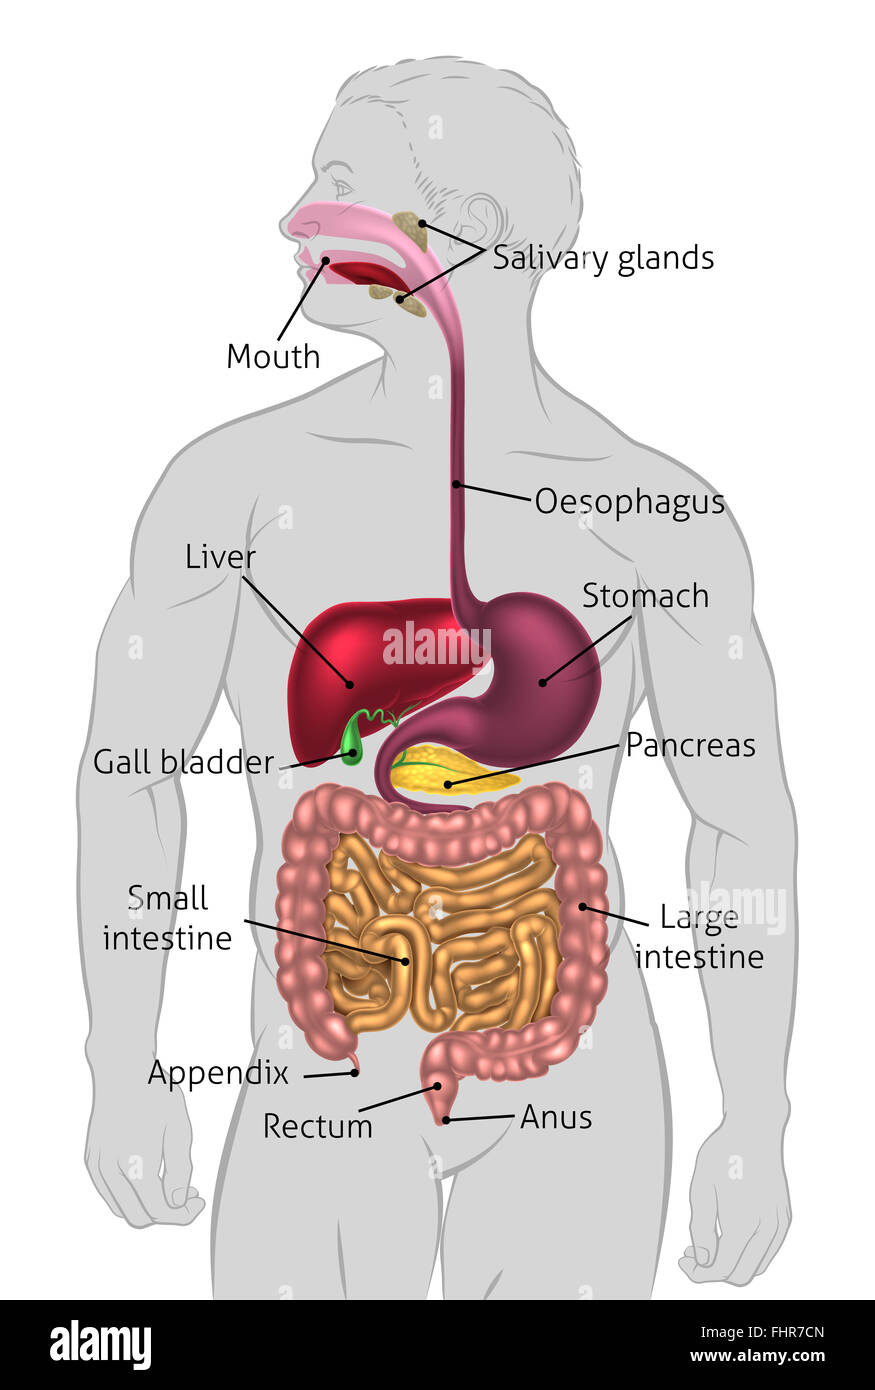 The human digestive system, digestive tract or alimentary canal with